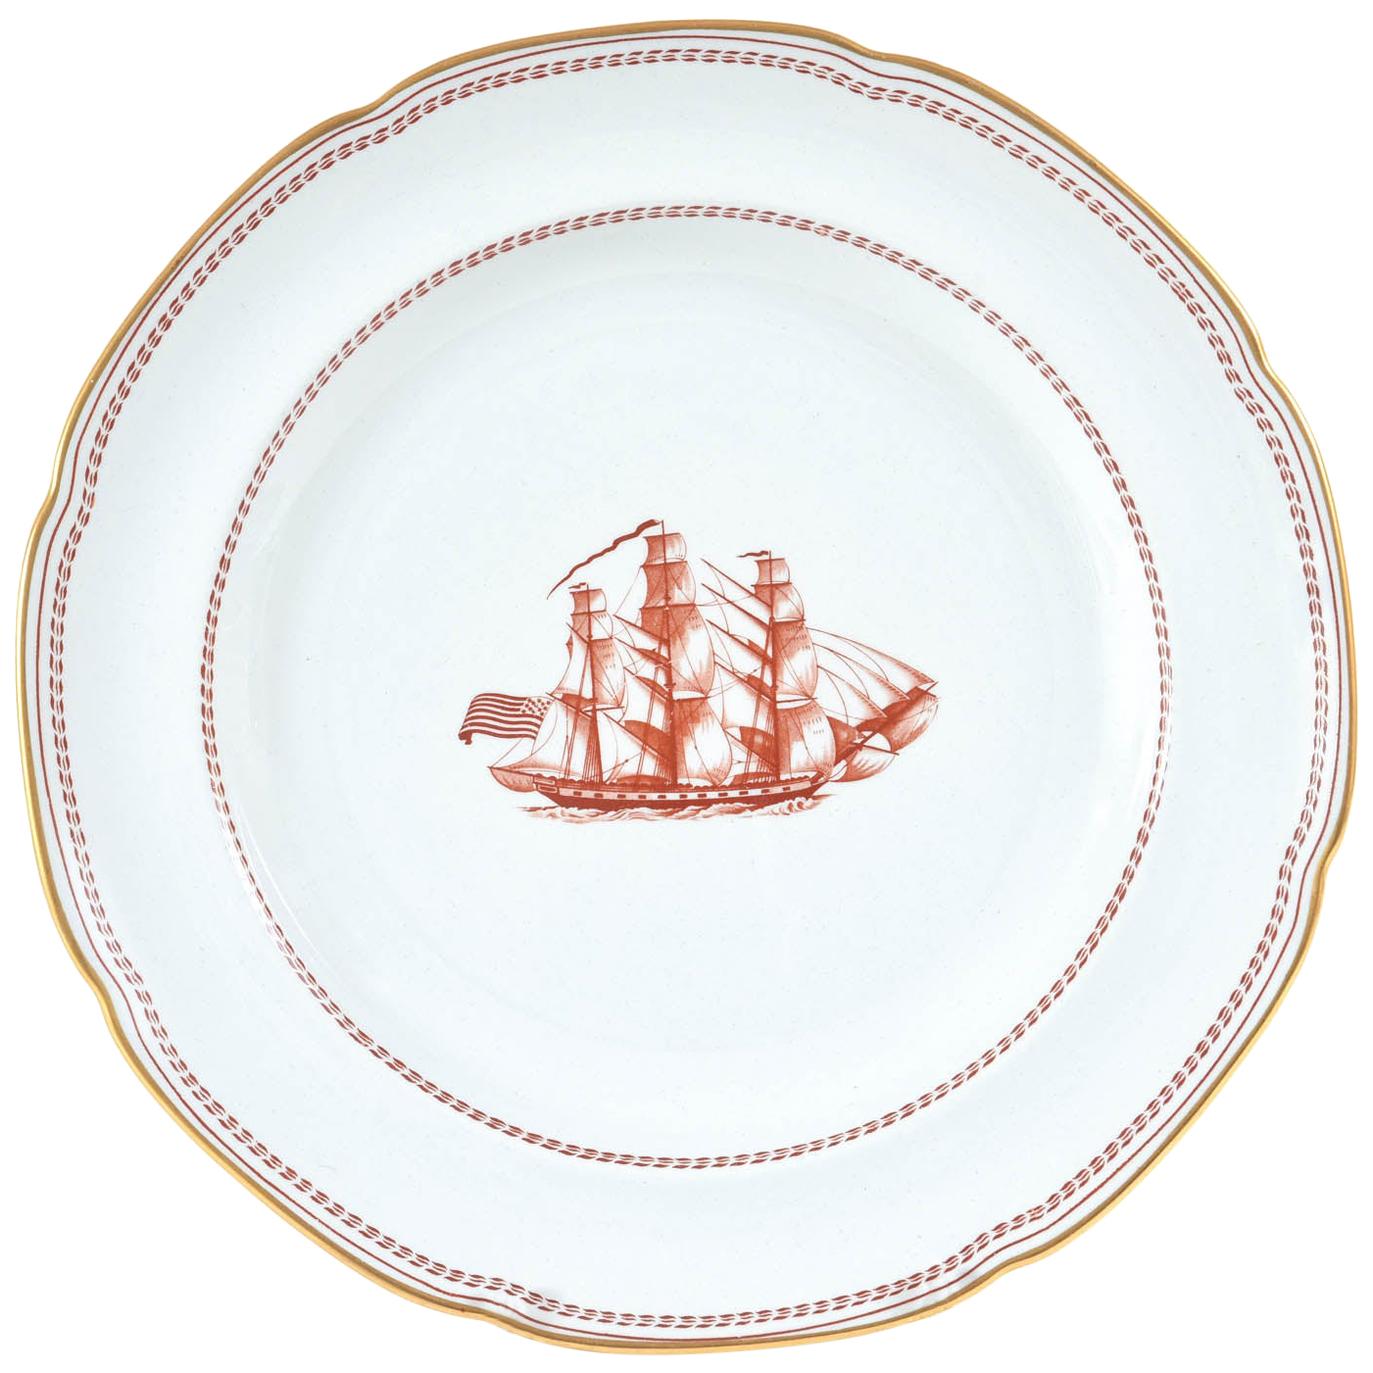 Dinner Plate in Spode Tradewinds in Red, Gold Trimmed, Vintage, circa 1960s